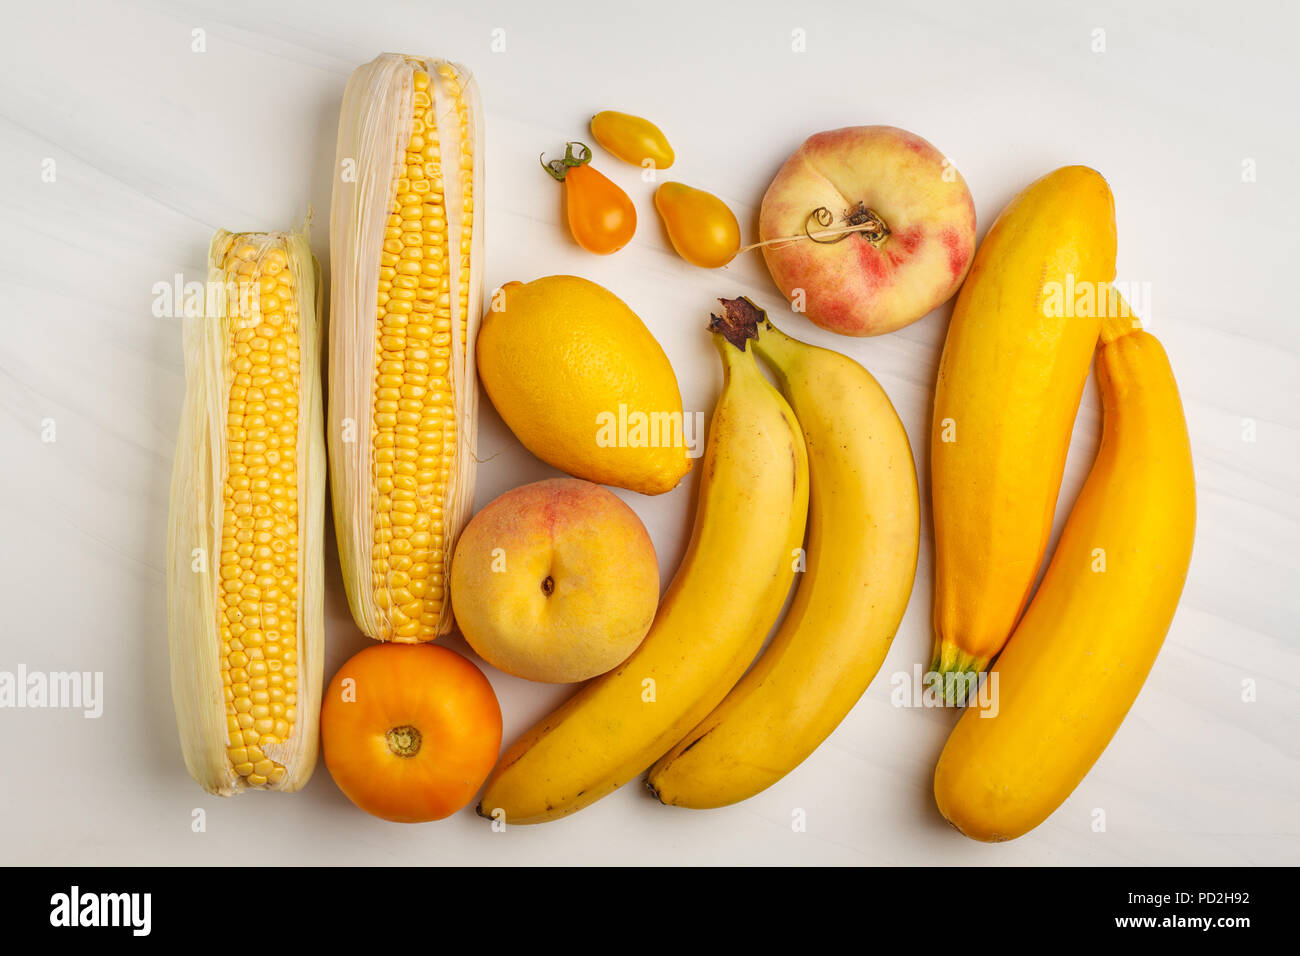 Assortment of yellow vegetables on a white background, top view. Fruits and vegetables containing carotene. Stock Photo